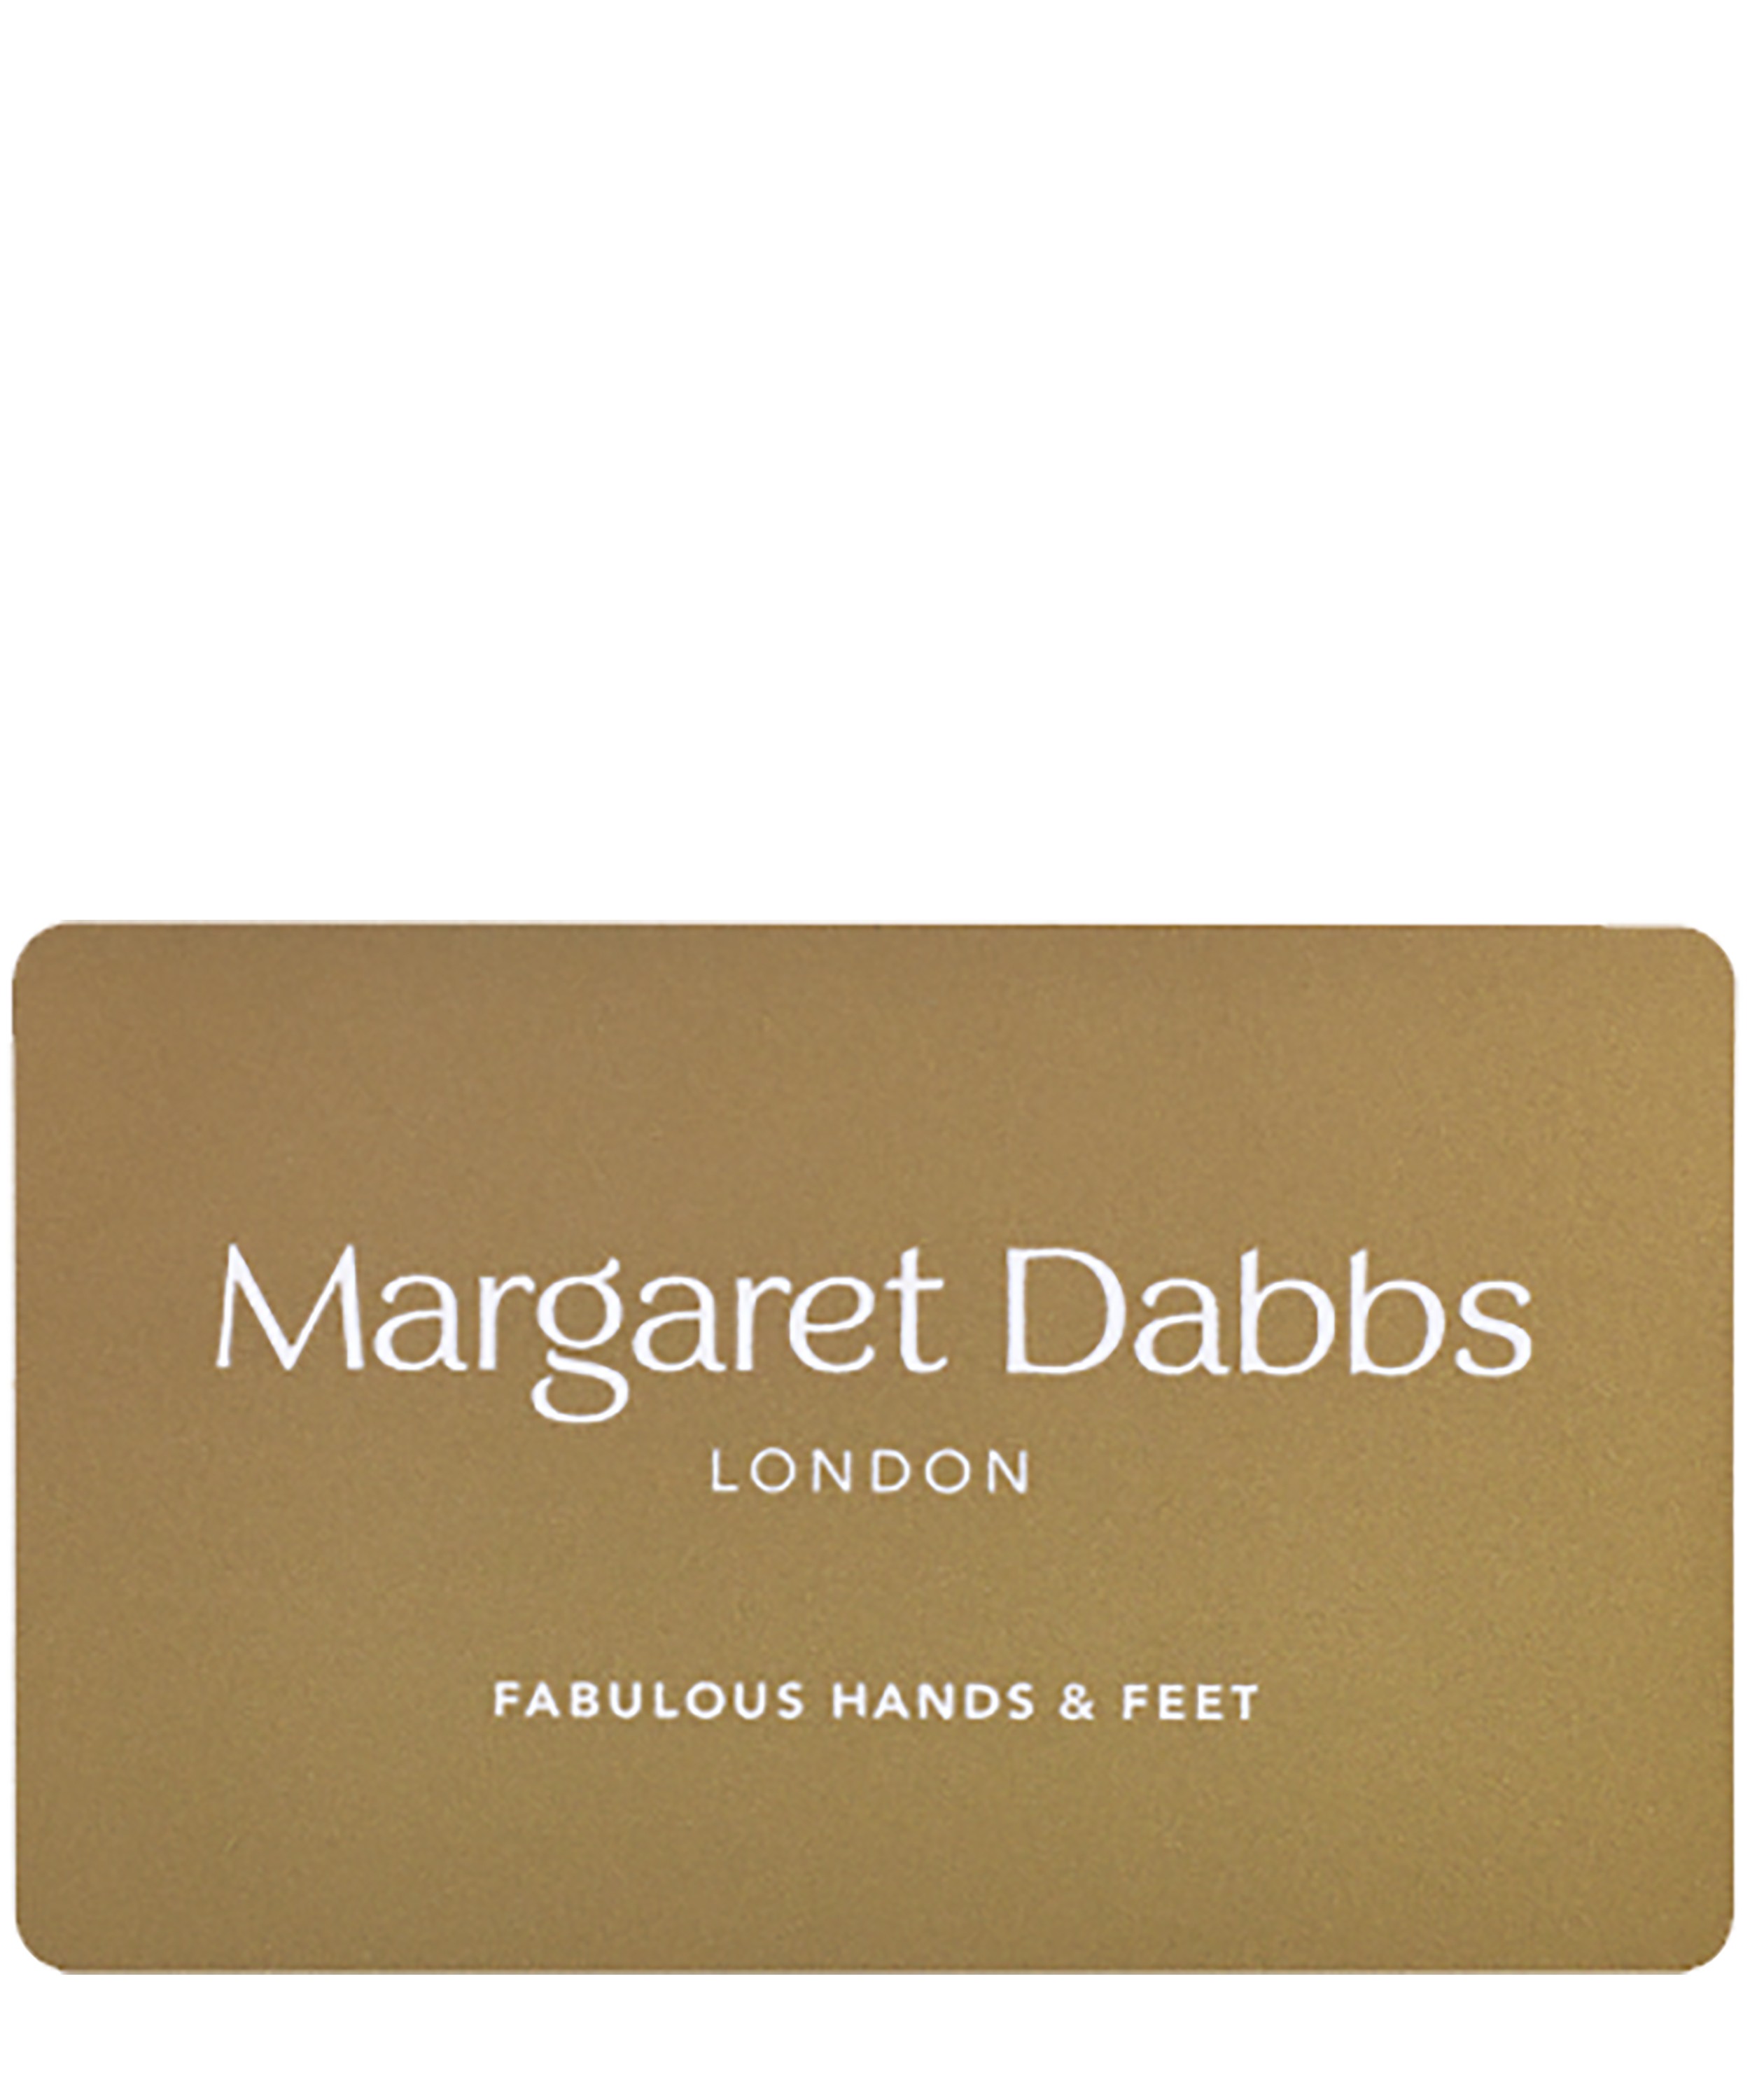 Margaret Dabbs London - Sole Spa Men's Manicure at Liberty image number null